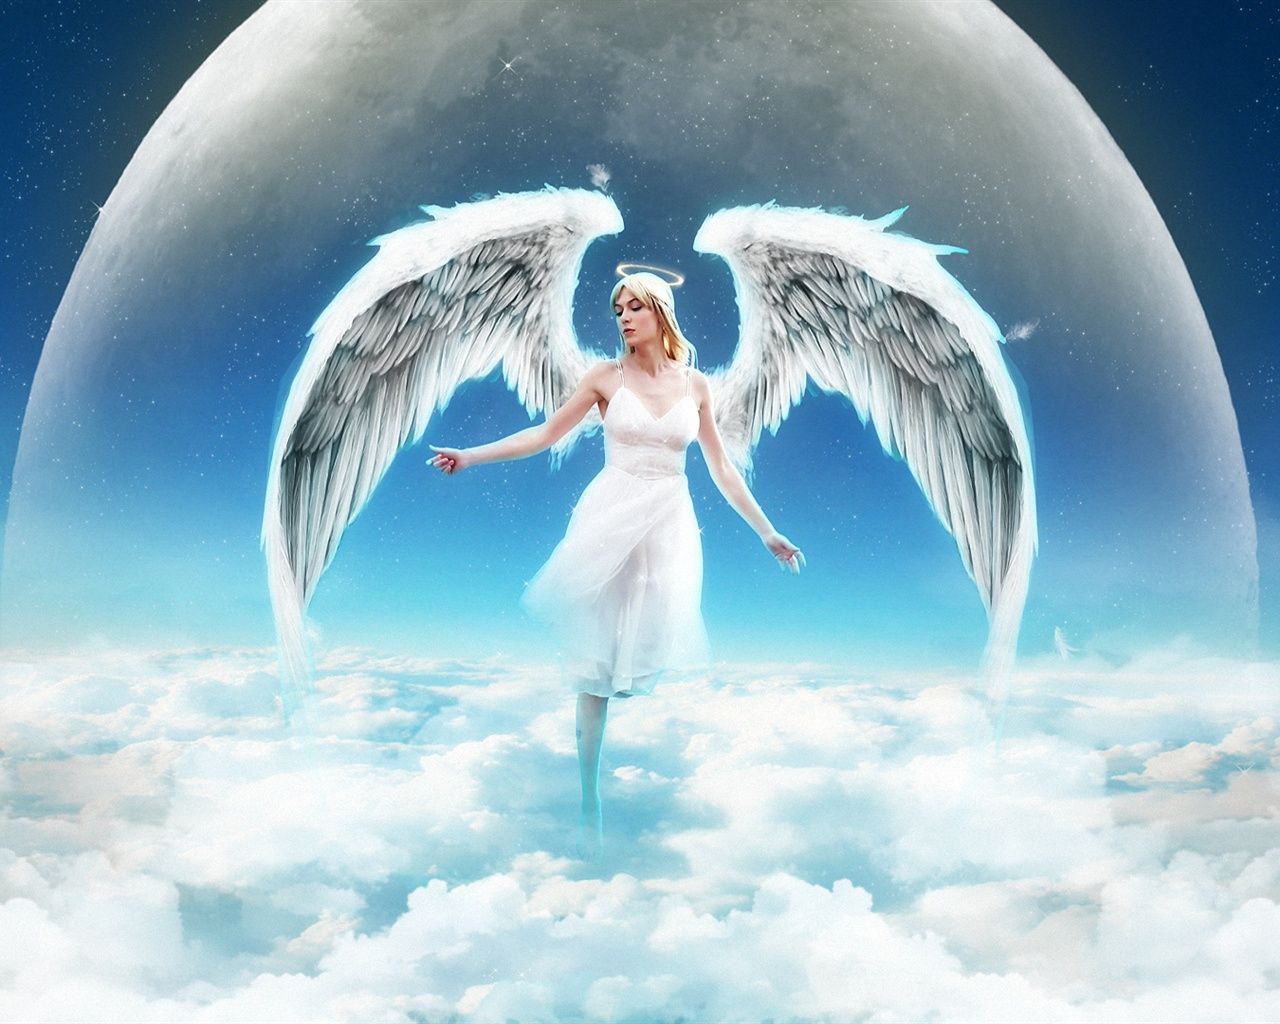 Wallpaper Angel girl on the sky, clouds 1920x1080 Full HD 2K Picture, Image